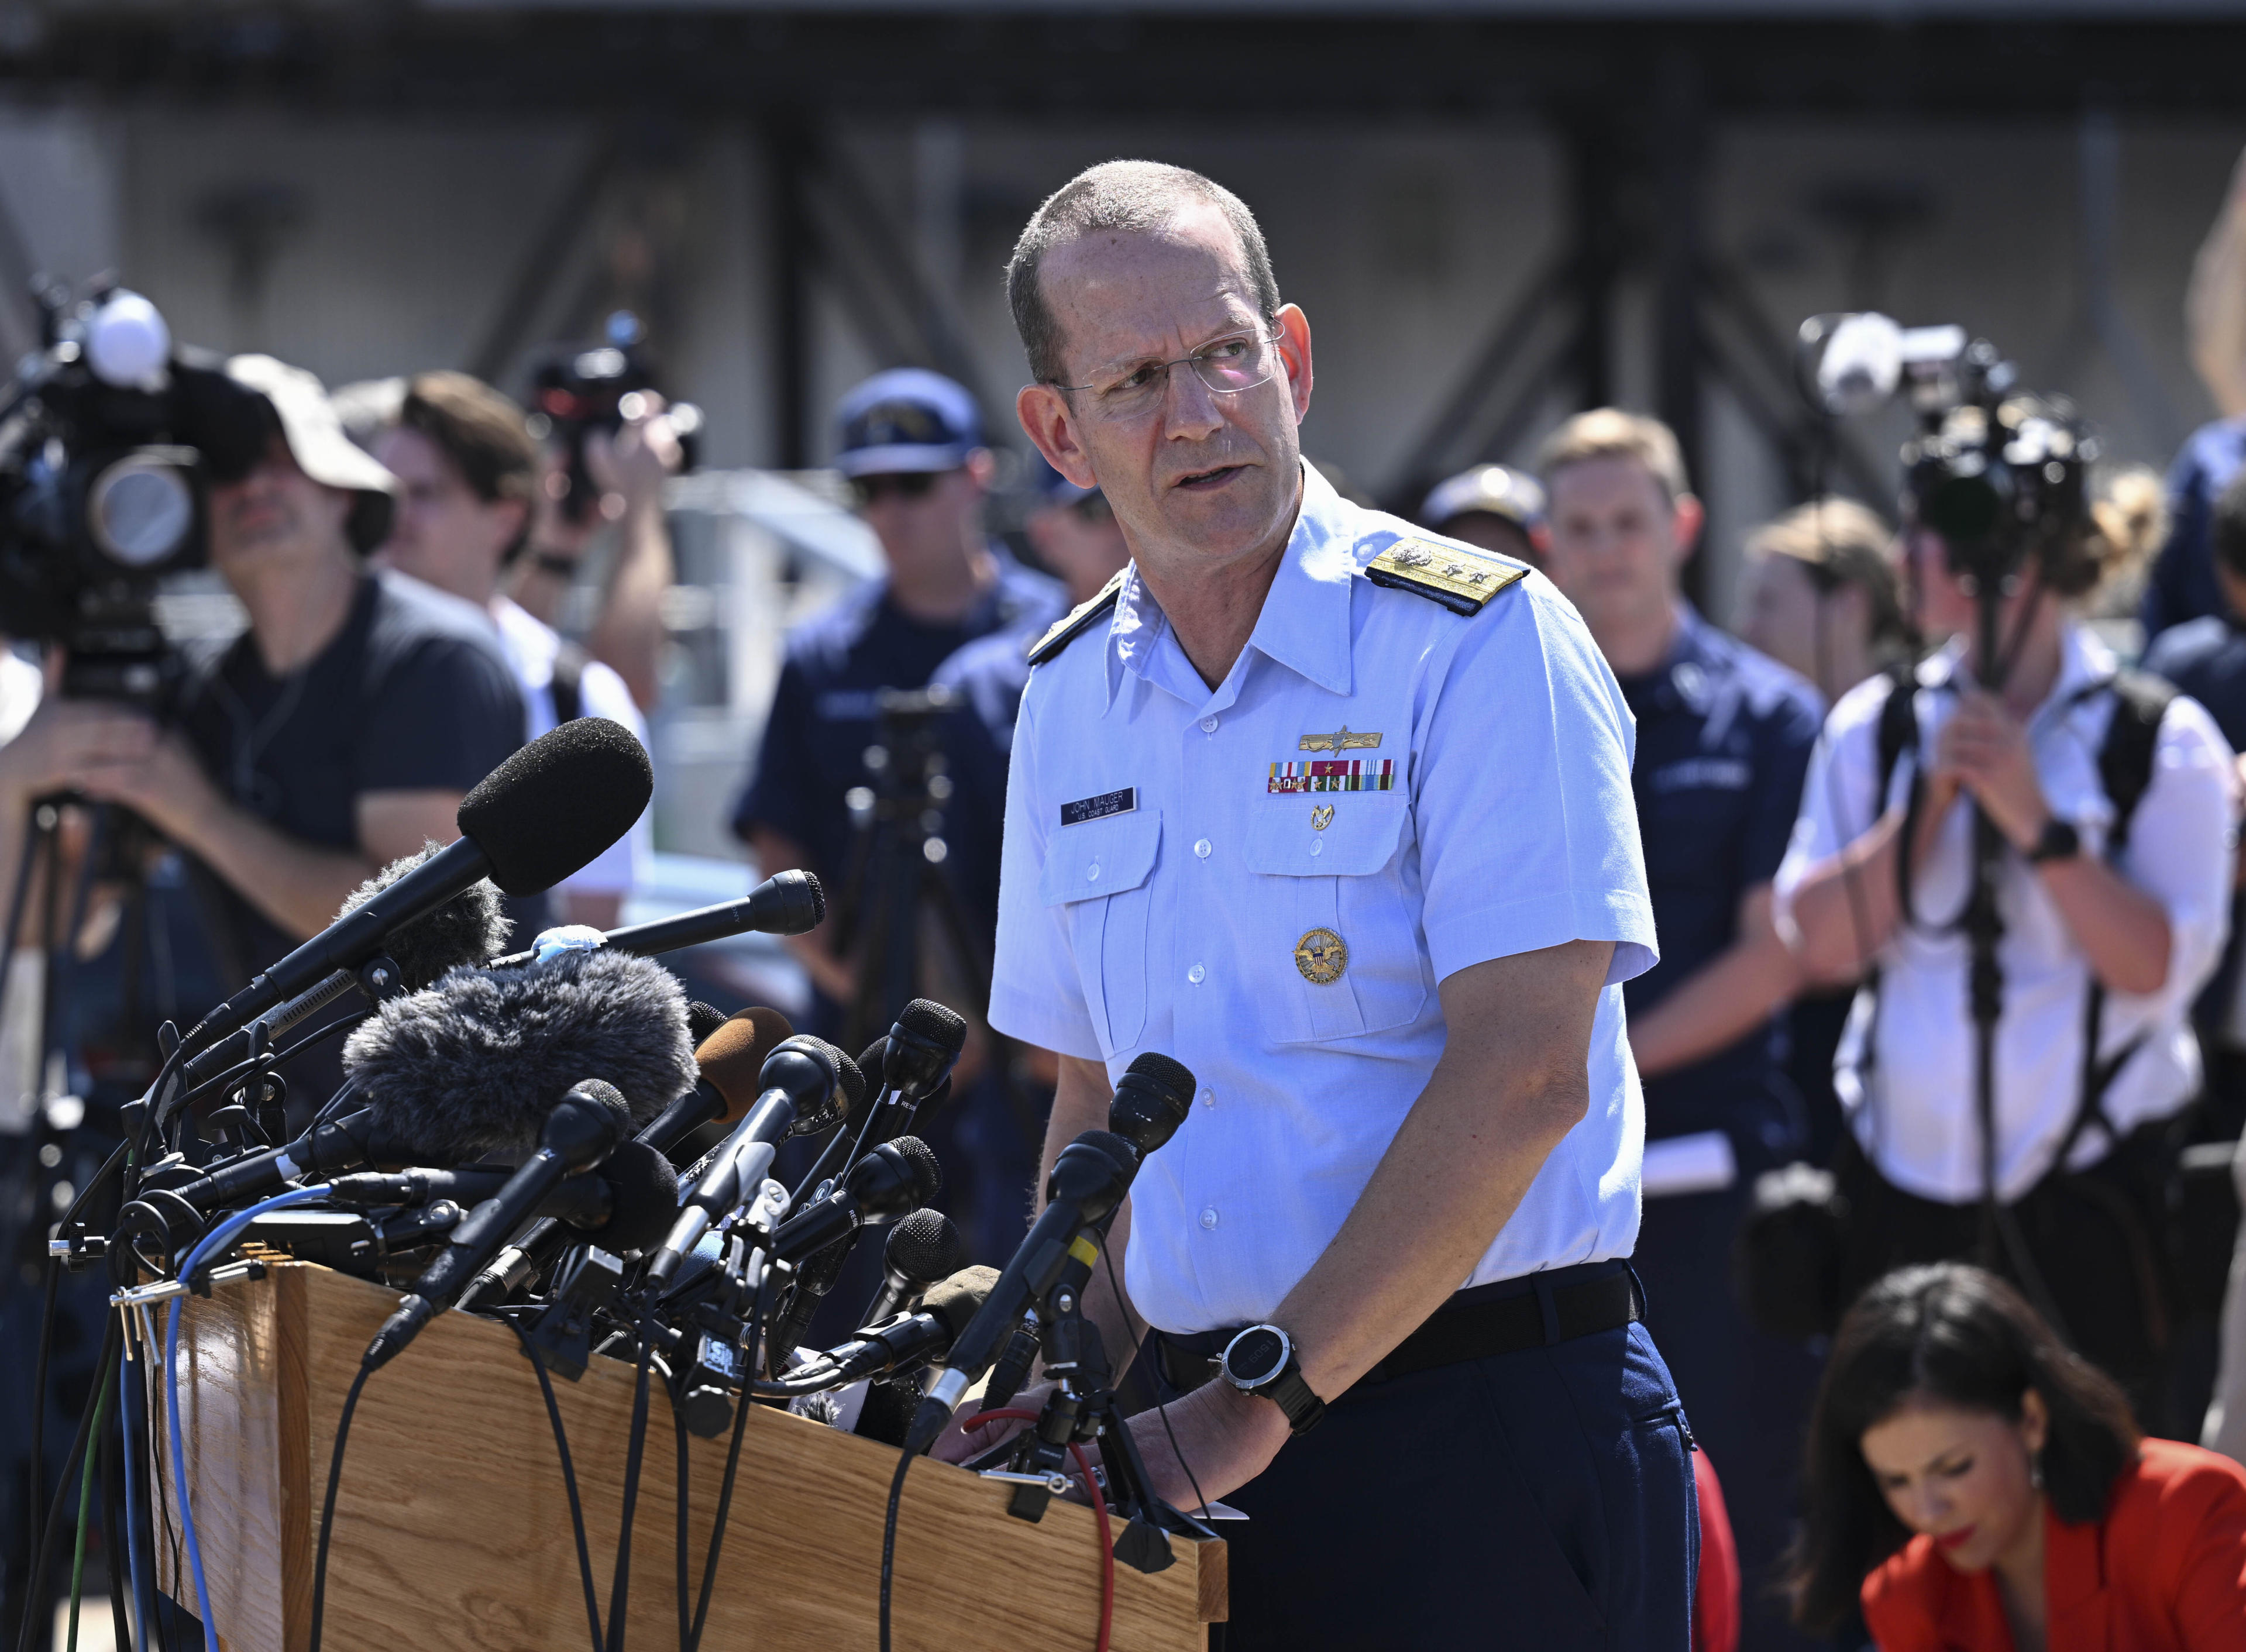 Rear Adm. John Mauger, the First Coast Guard District commander, in a press conference, said debris discovered on the ocean floor suggested that the missing submersible near the wreck of the Titanic suffered a 